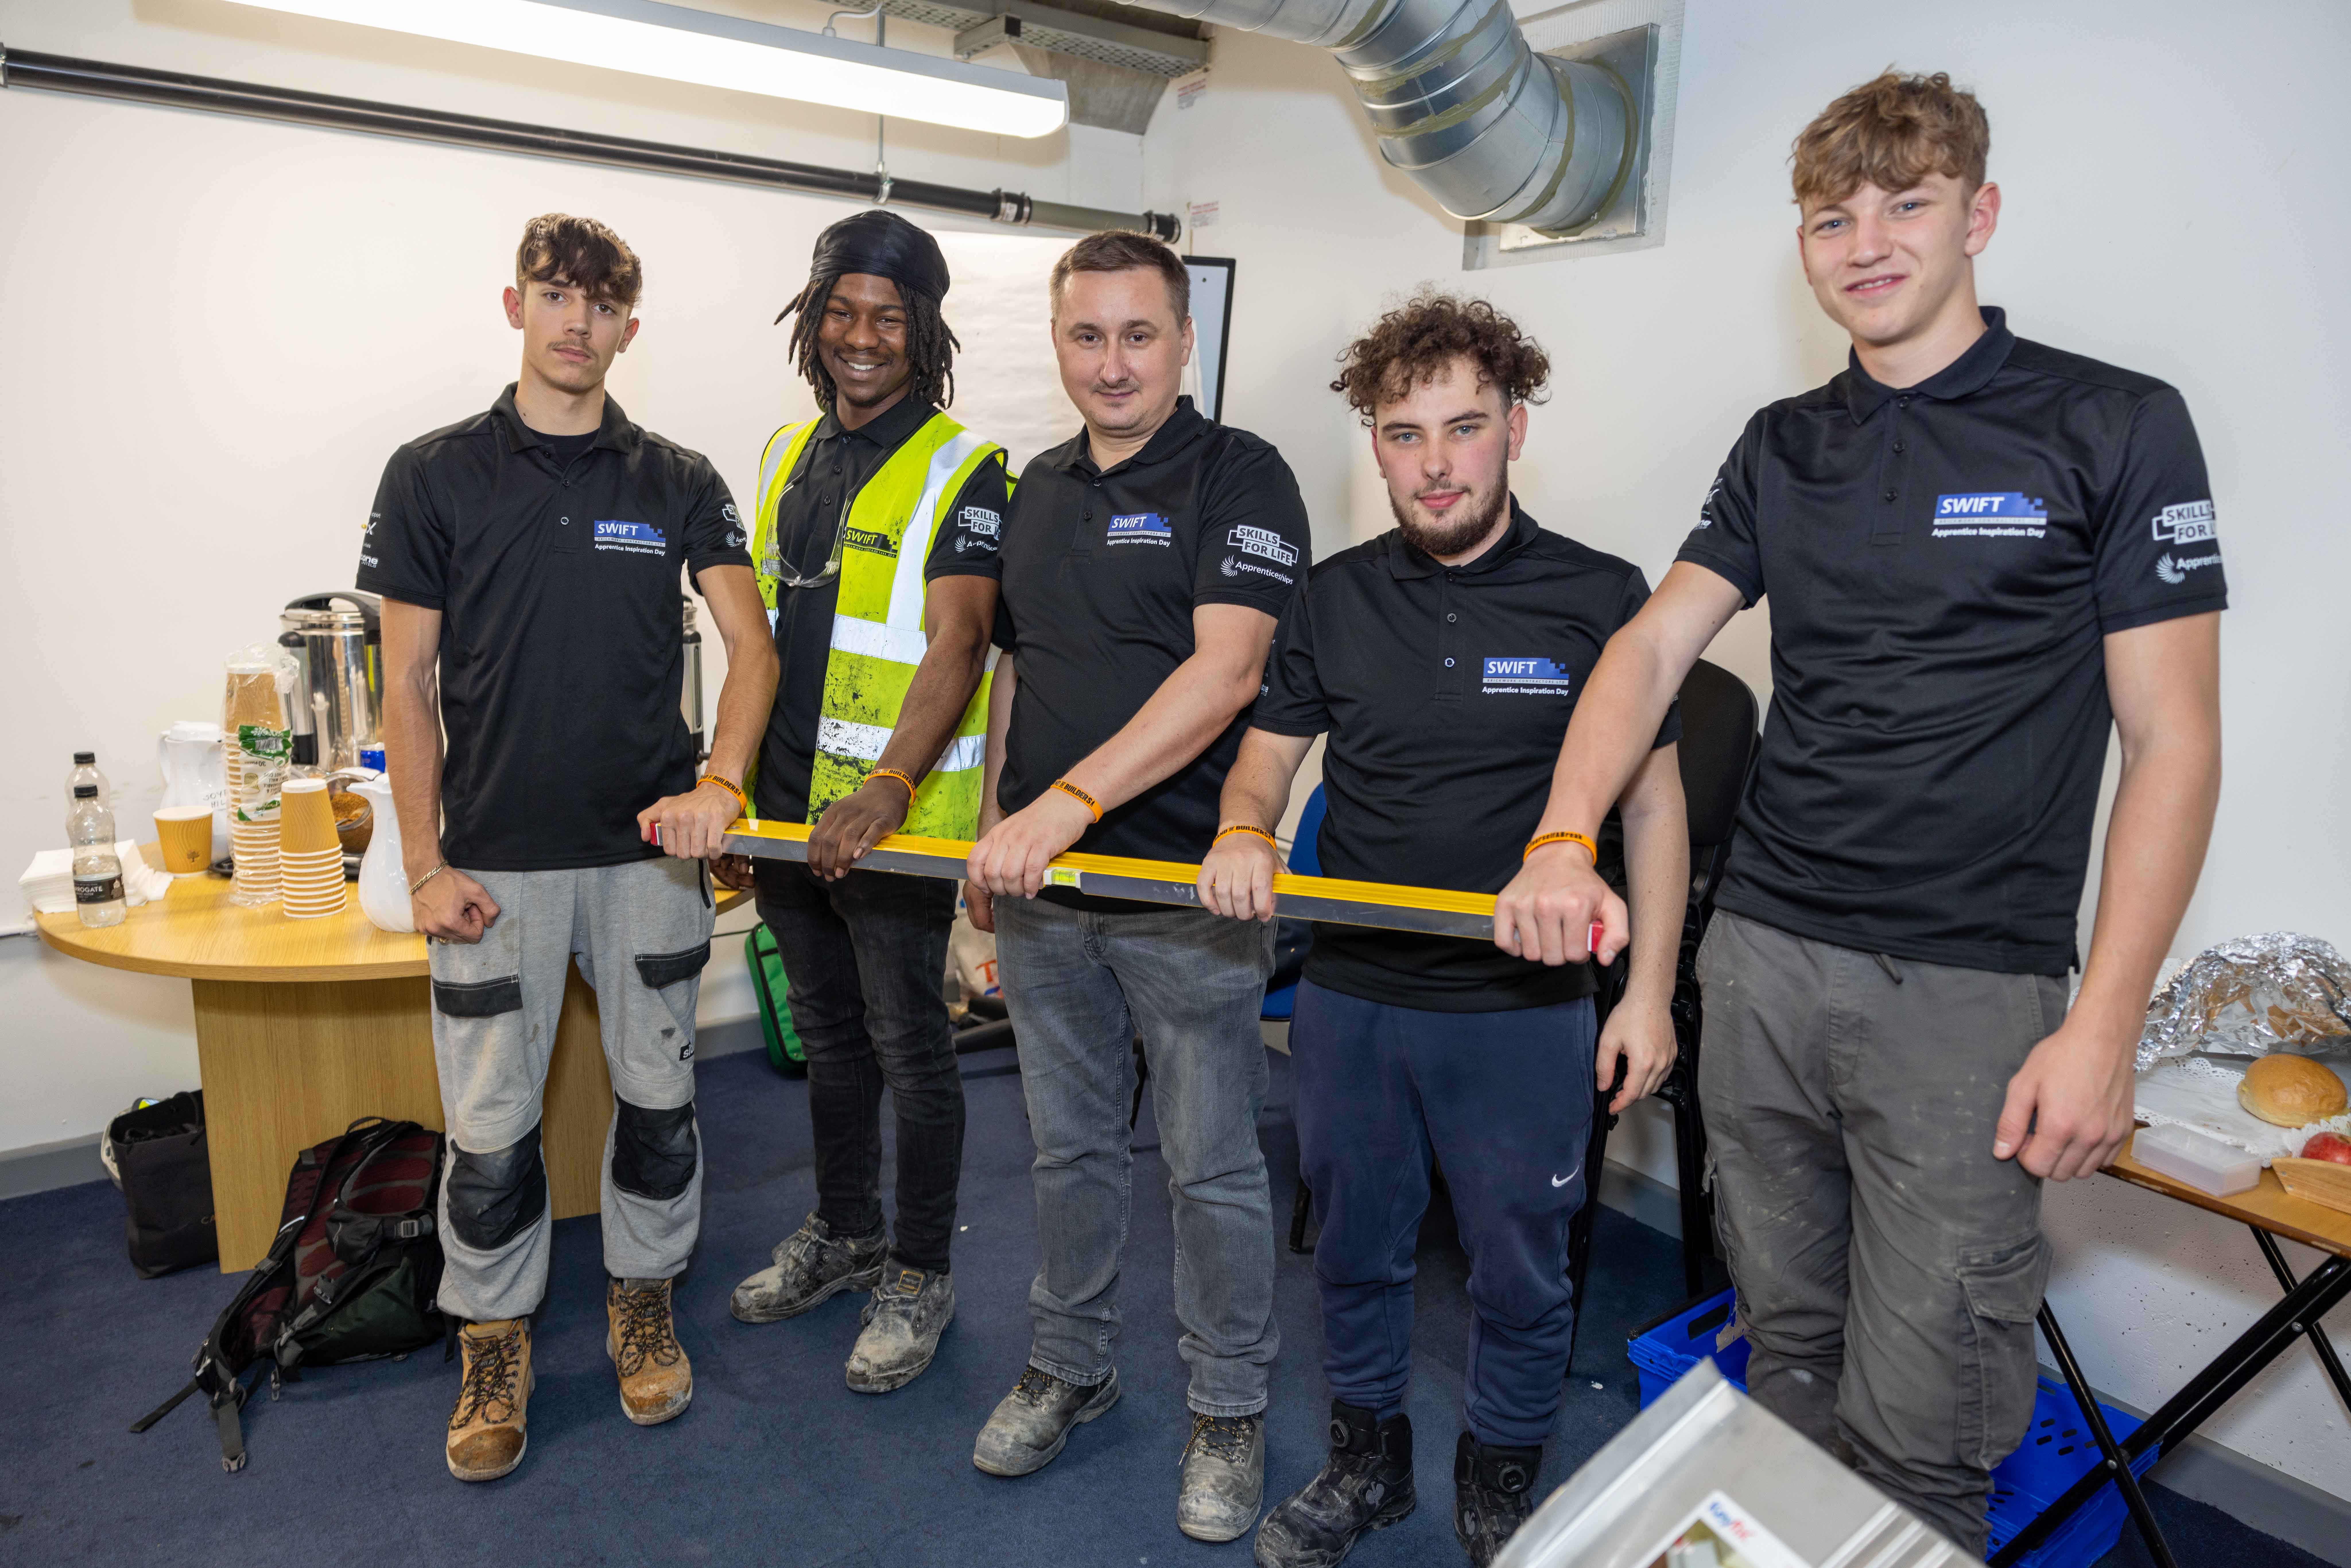 Swift Brickwork apprentices gain inspiration and tools to kick-start career